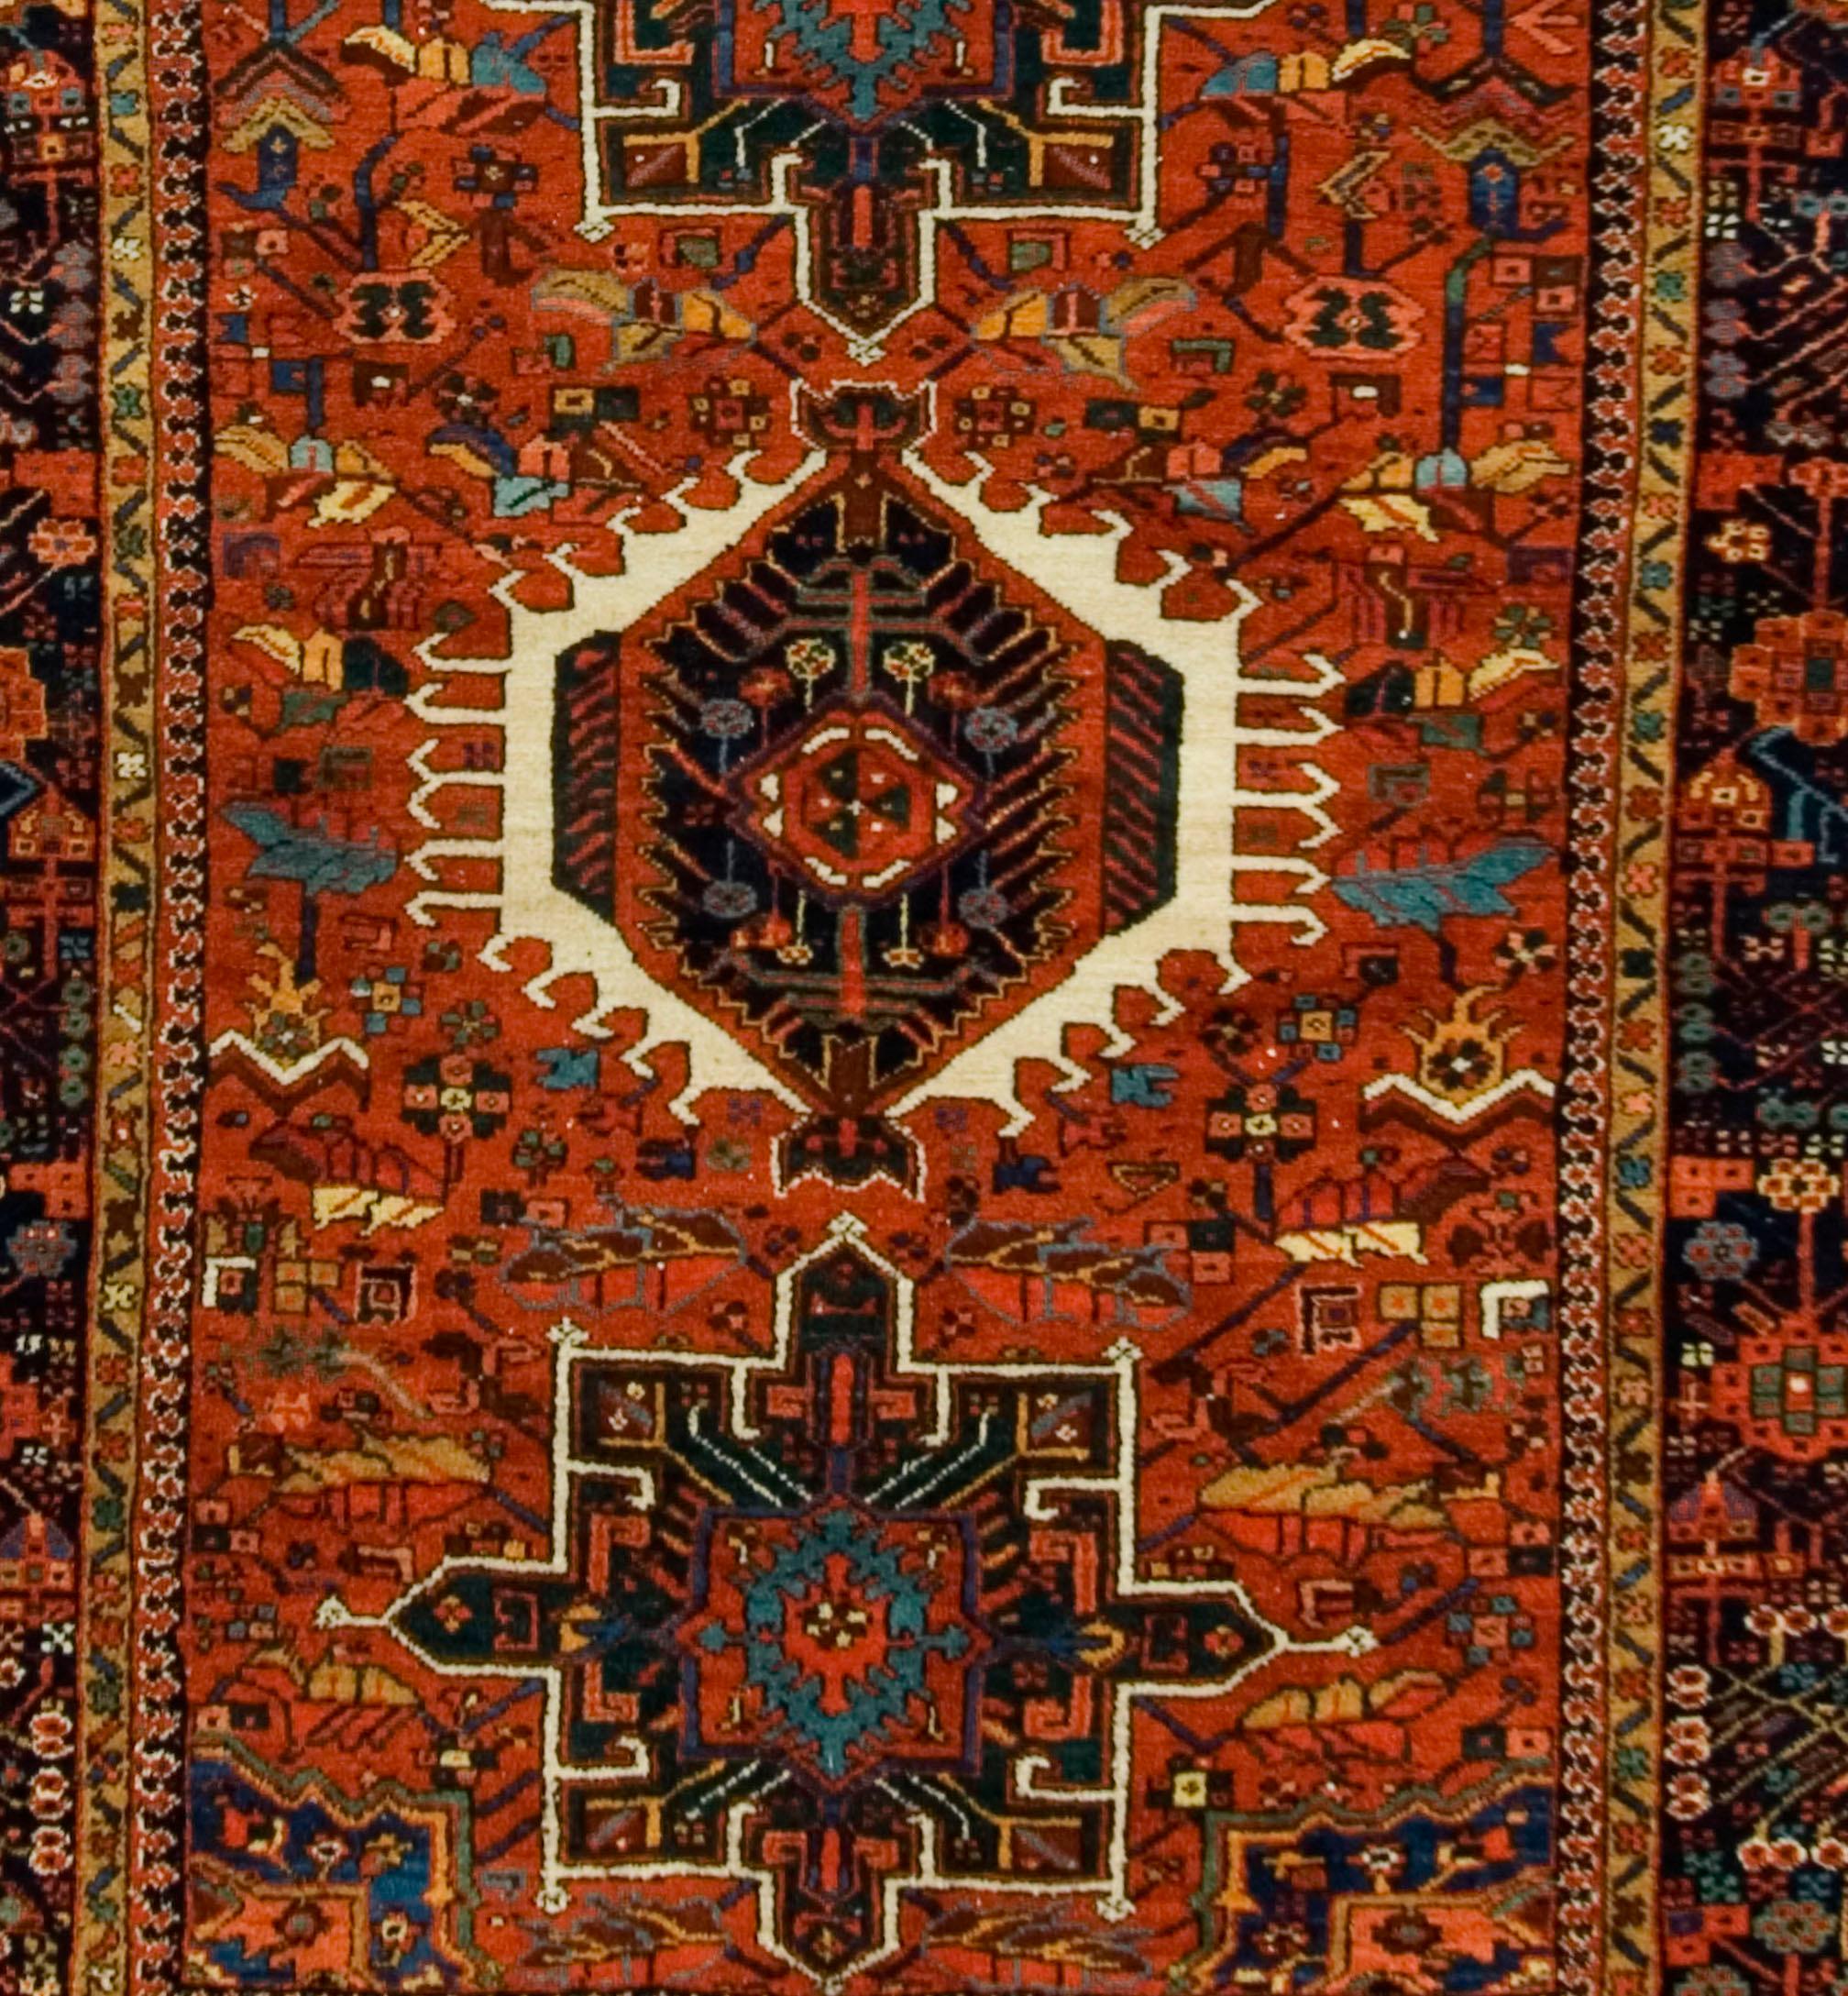 A lovely antique Persian Heriz rug measures 4'11 x 6'5 . The red ground with ivory, greens and soft blues create this small rug with a wonderful visual impact.